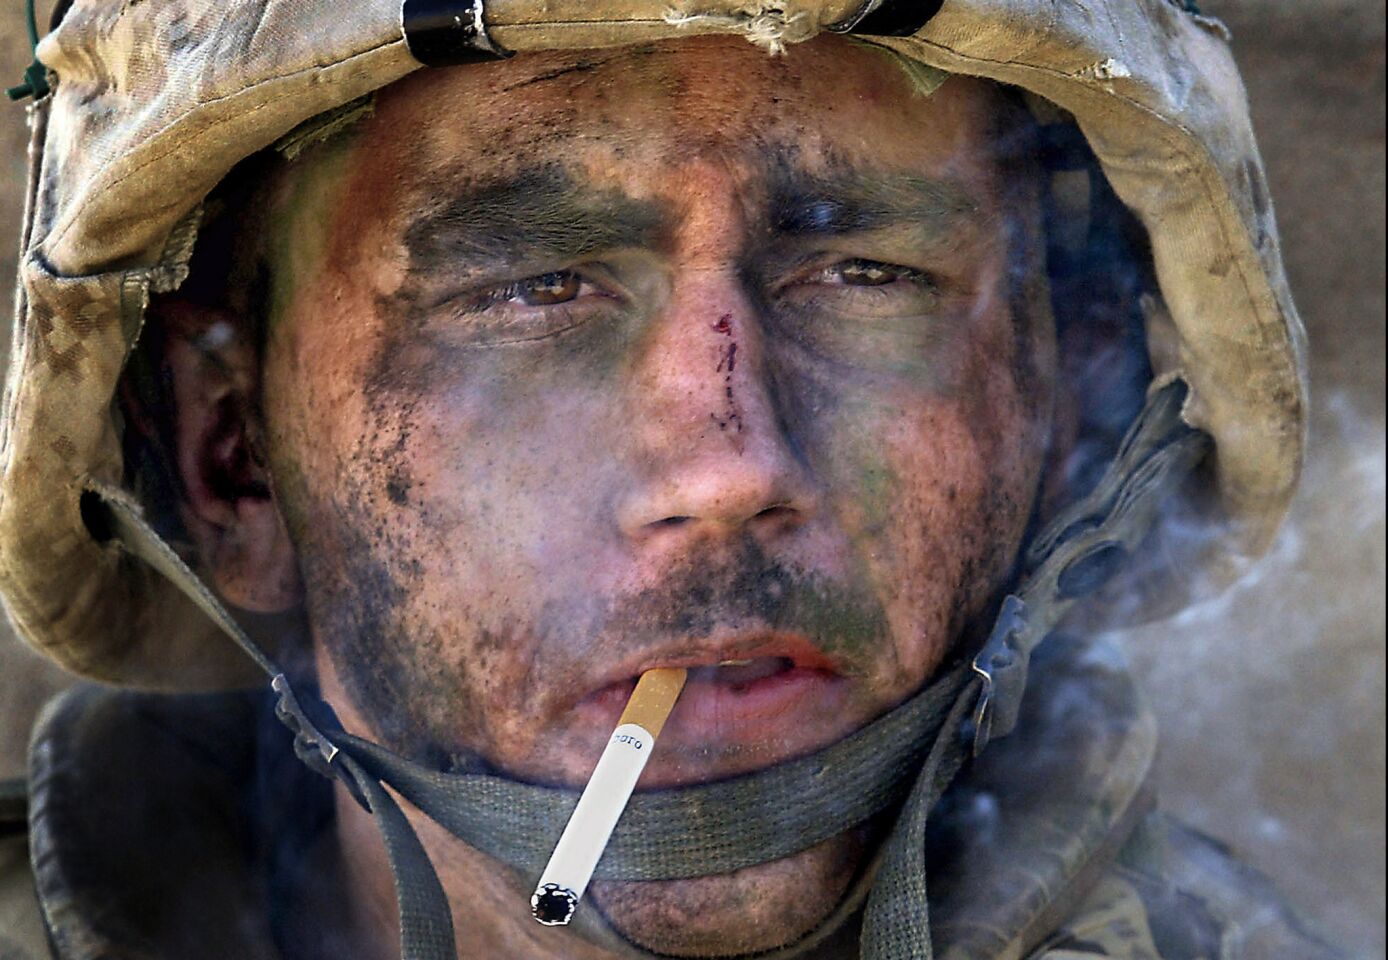 Finalist Luis Sinco of Los Angeles Times. For his iconic photograph of an exhausted U.S. Marine's face after a daylong battle in Iraq. I took this photograph of Lance Cpl. James Blake Miller on Nov. 9, 2004, while embedded with his Marine unit as they mounted an assault on the insurgent stronghold of Fallouja, Iraq. The image was published on the front pages of more than 150 newspapers and widely viewed on television and the internet. A country boy from Kentucky, Miller became an icon of the war. Many saw a heroic figure. In Miller's eyes I saw a man at the point of breaking. It was how I felt, too.